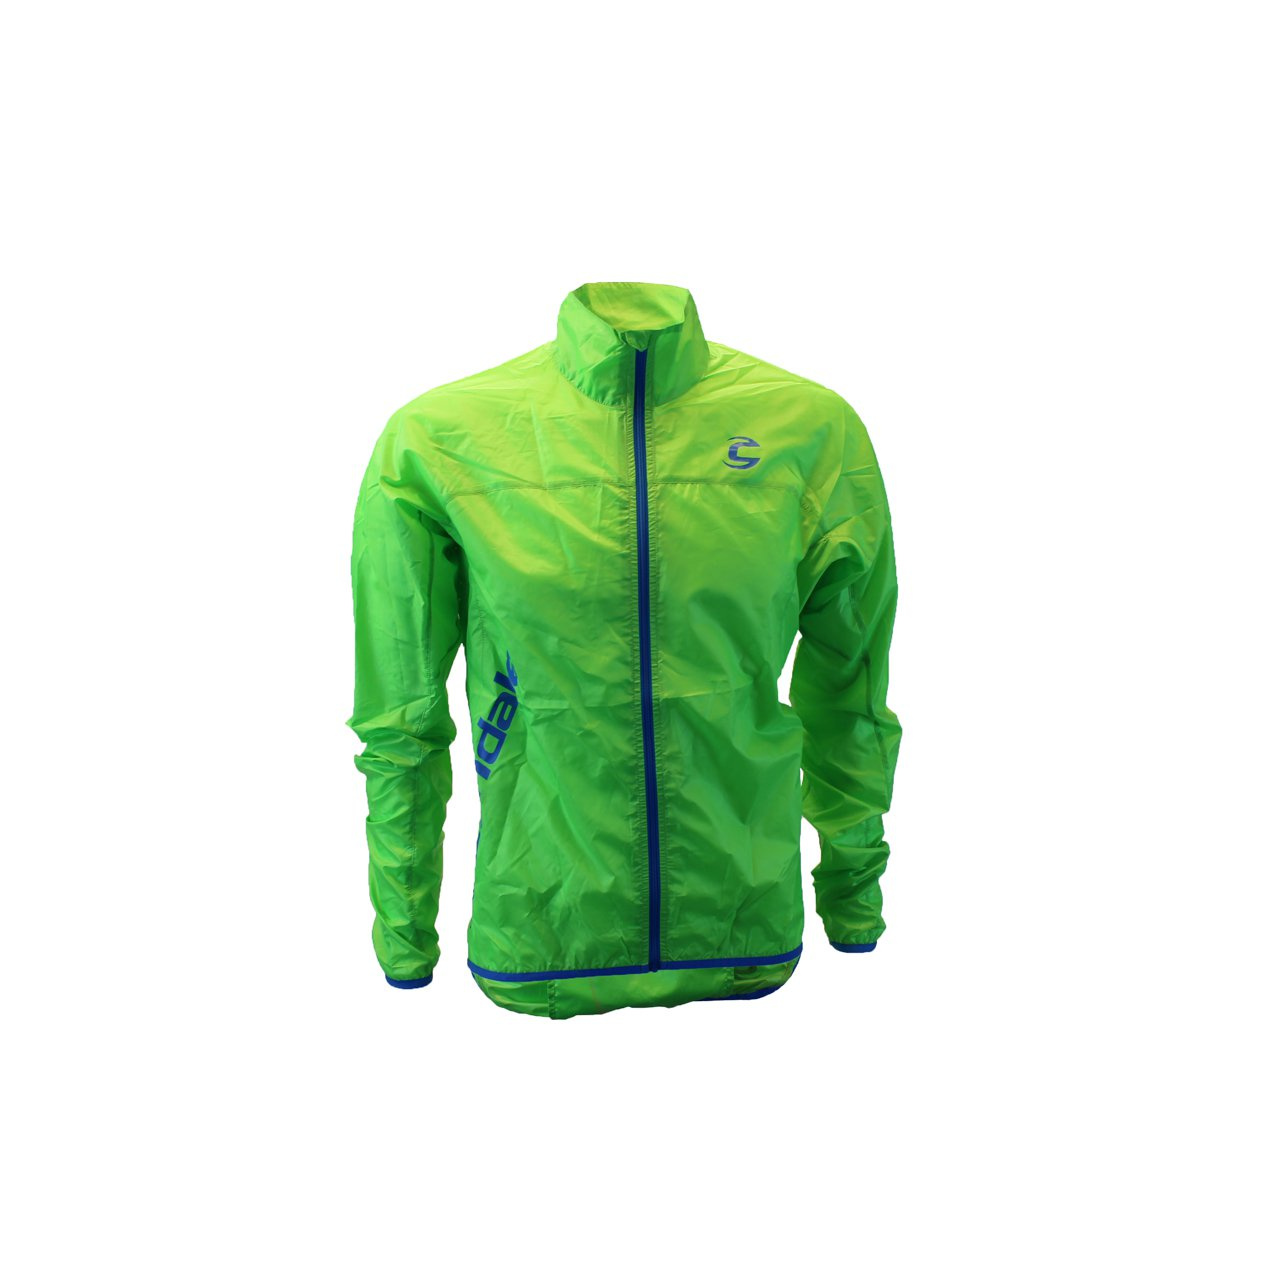 Cannondale Pack Me Jacket 2016